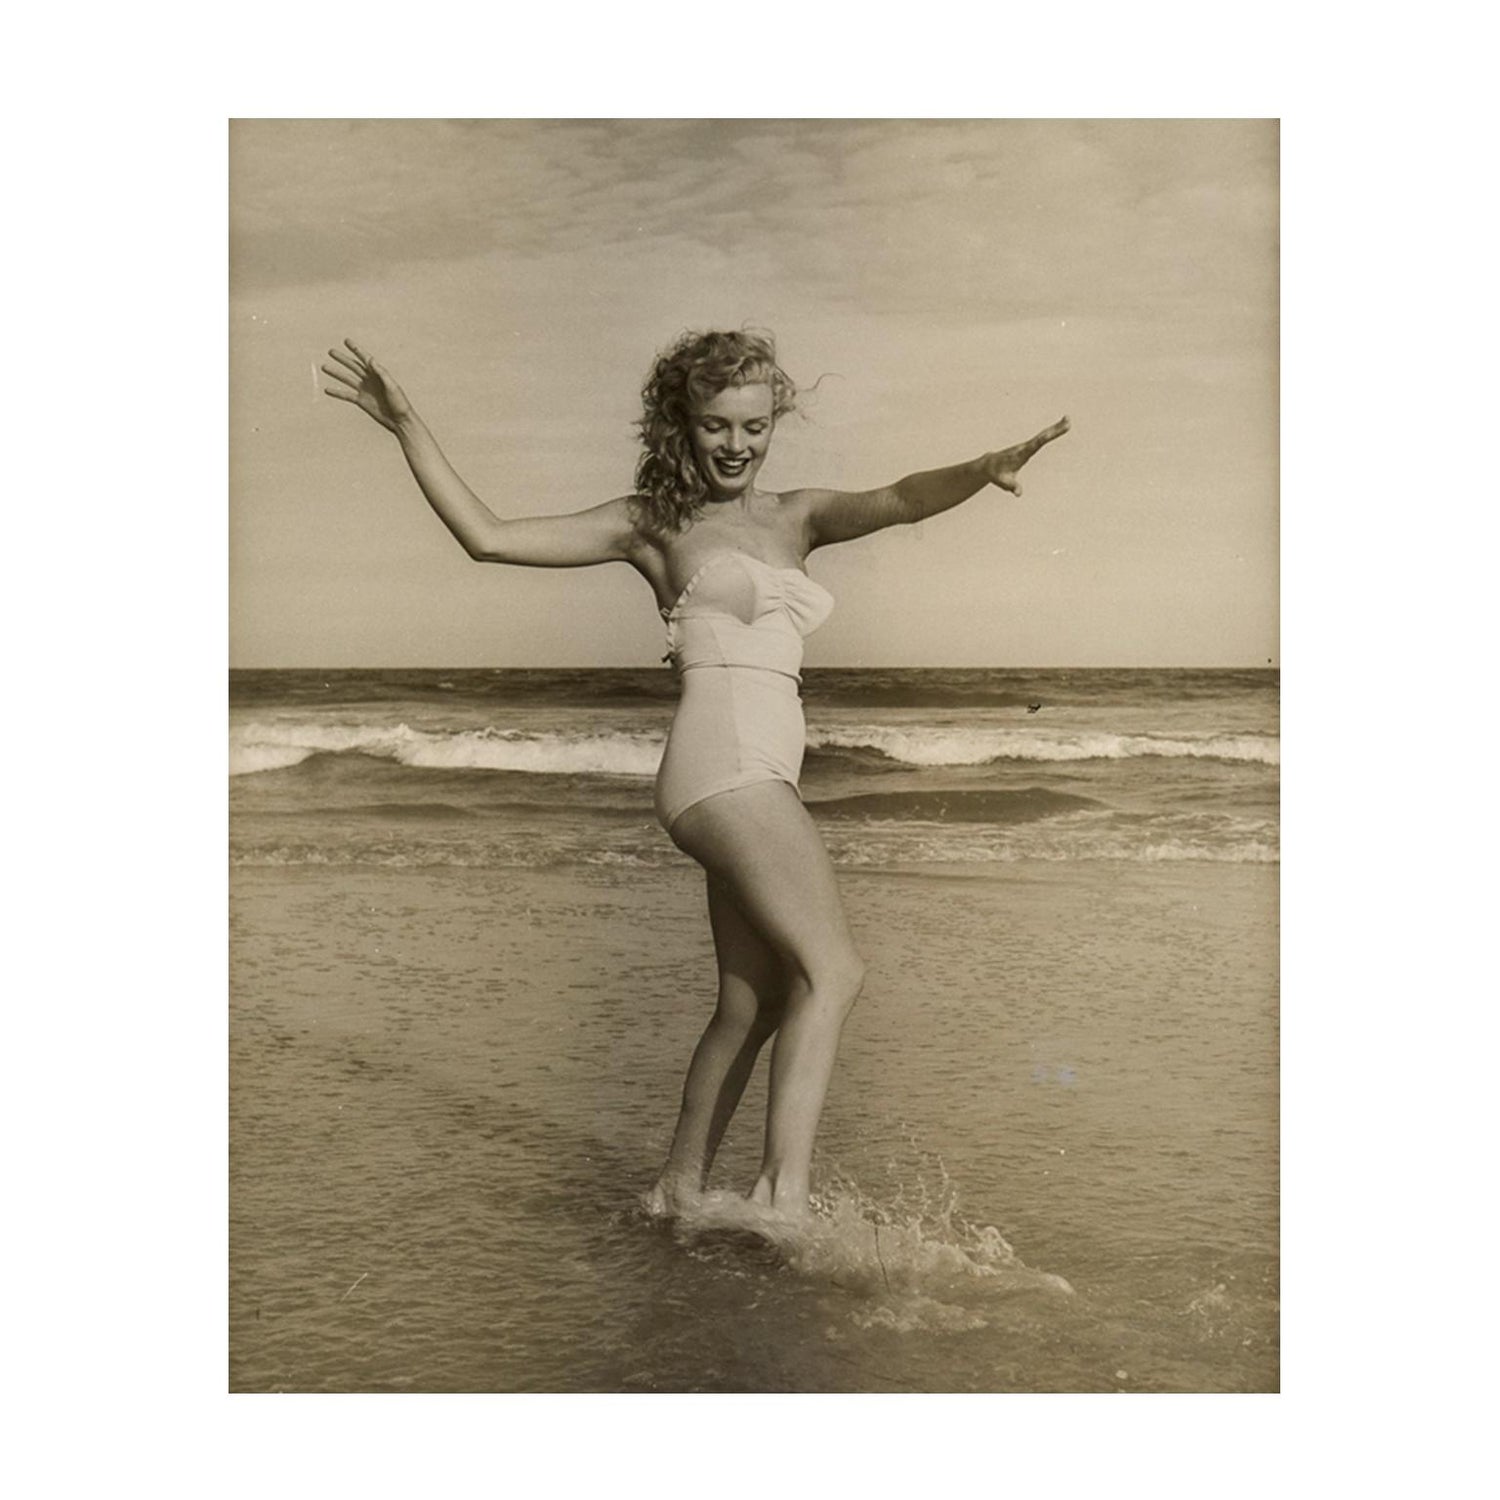 Andre De Dienes Marilyn Monroe Playing On The Beach 1949 A